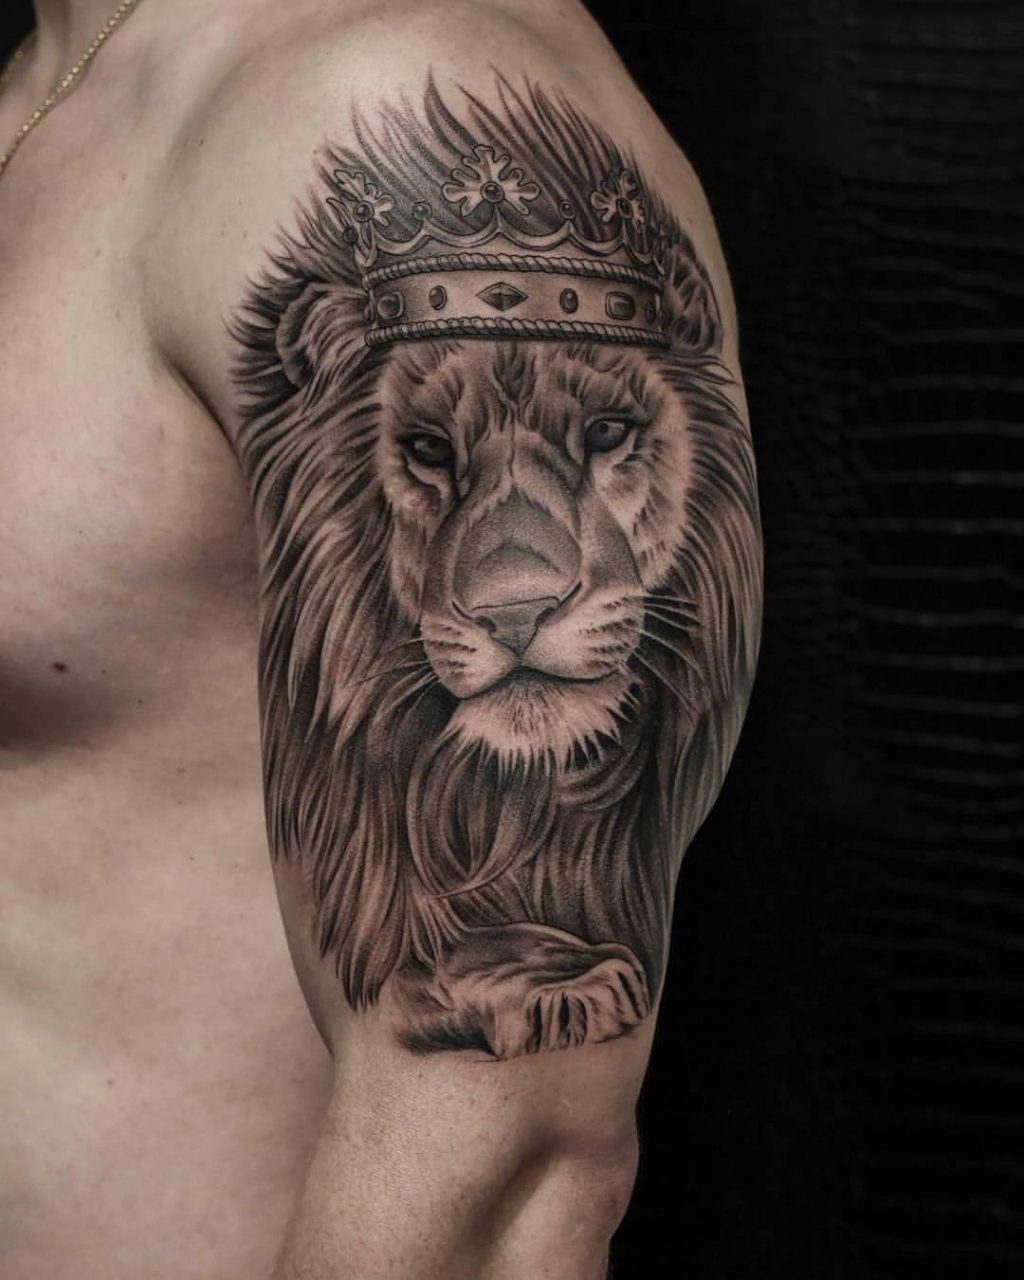 Tattoo Placement on Shoulders and Calves